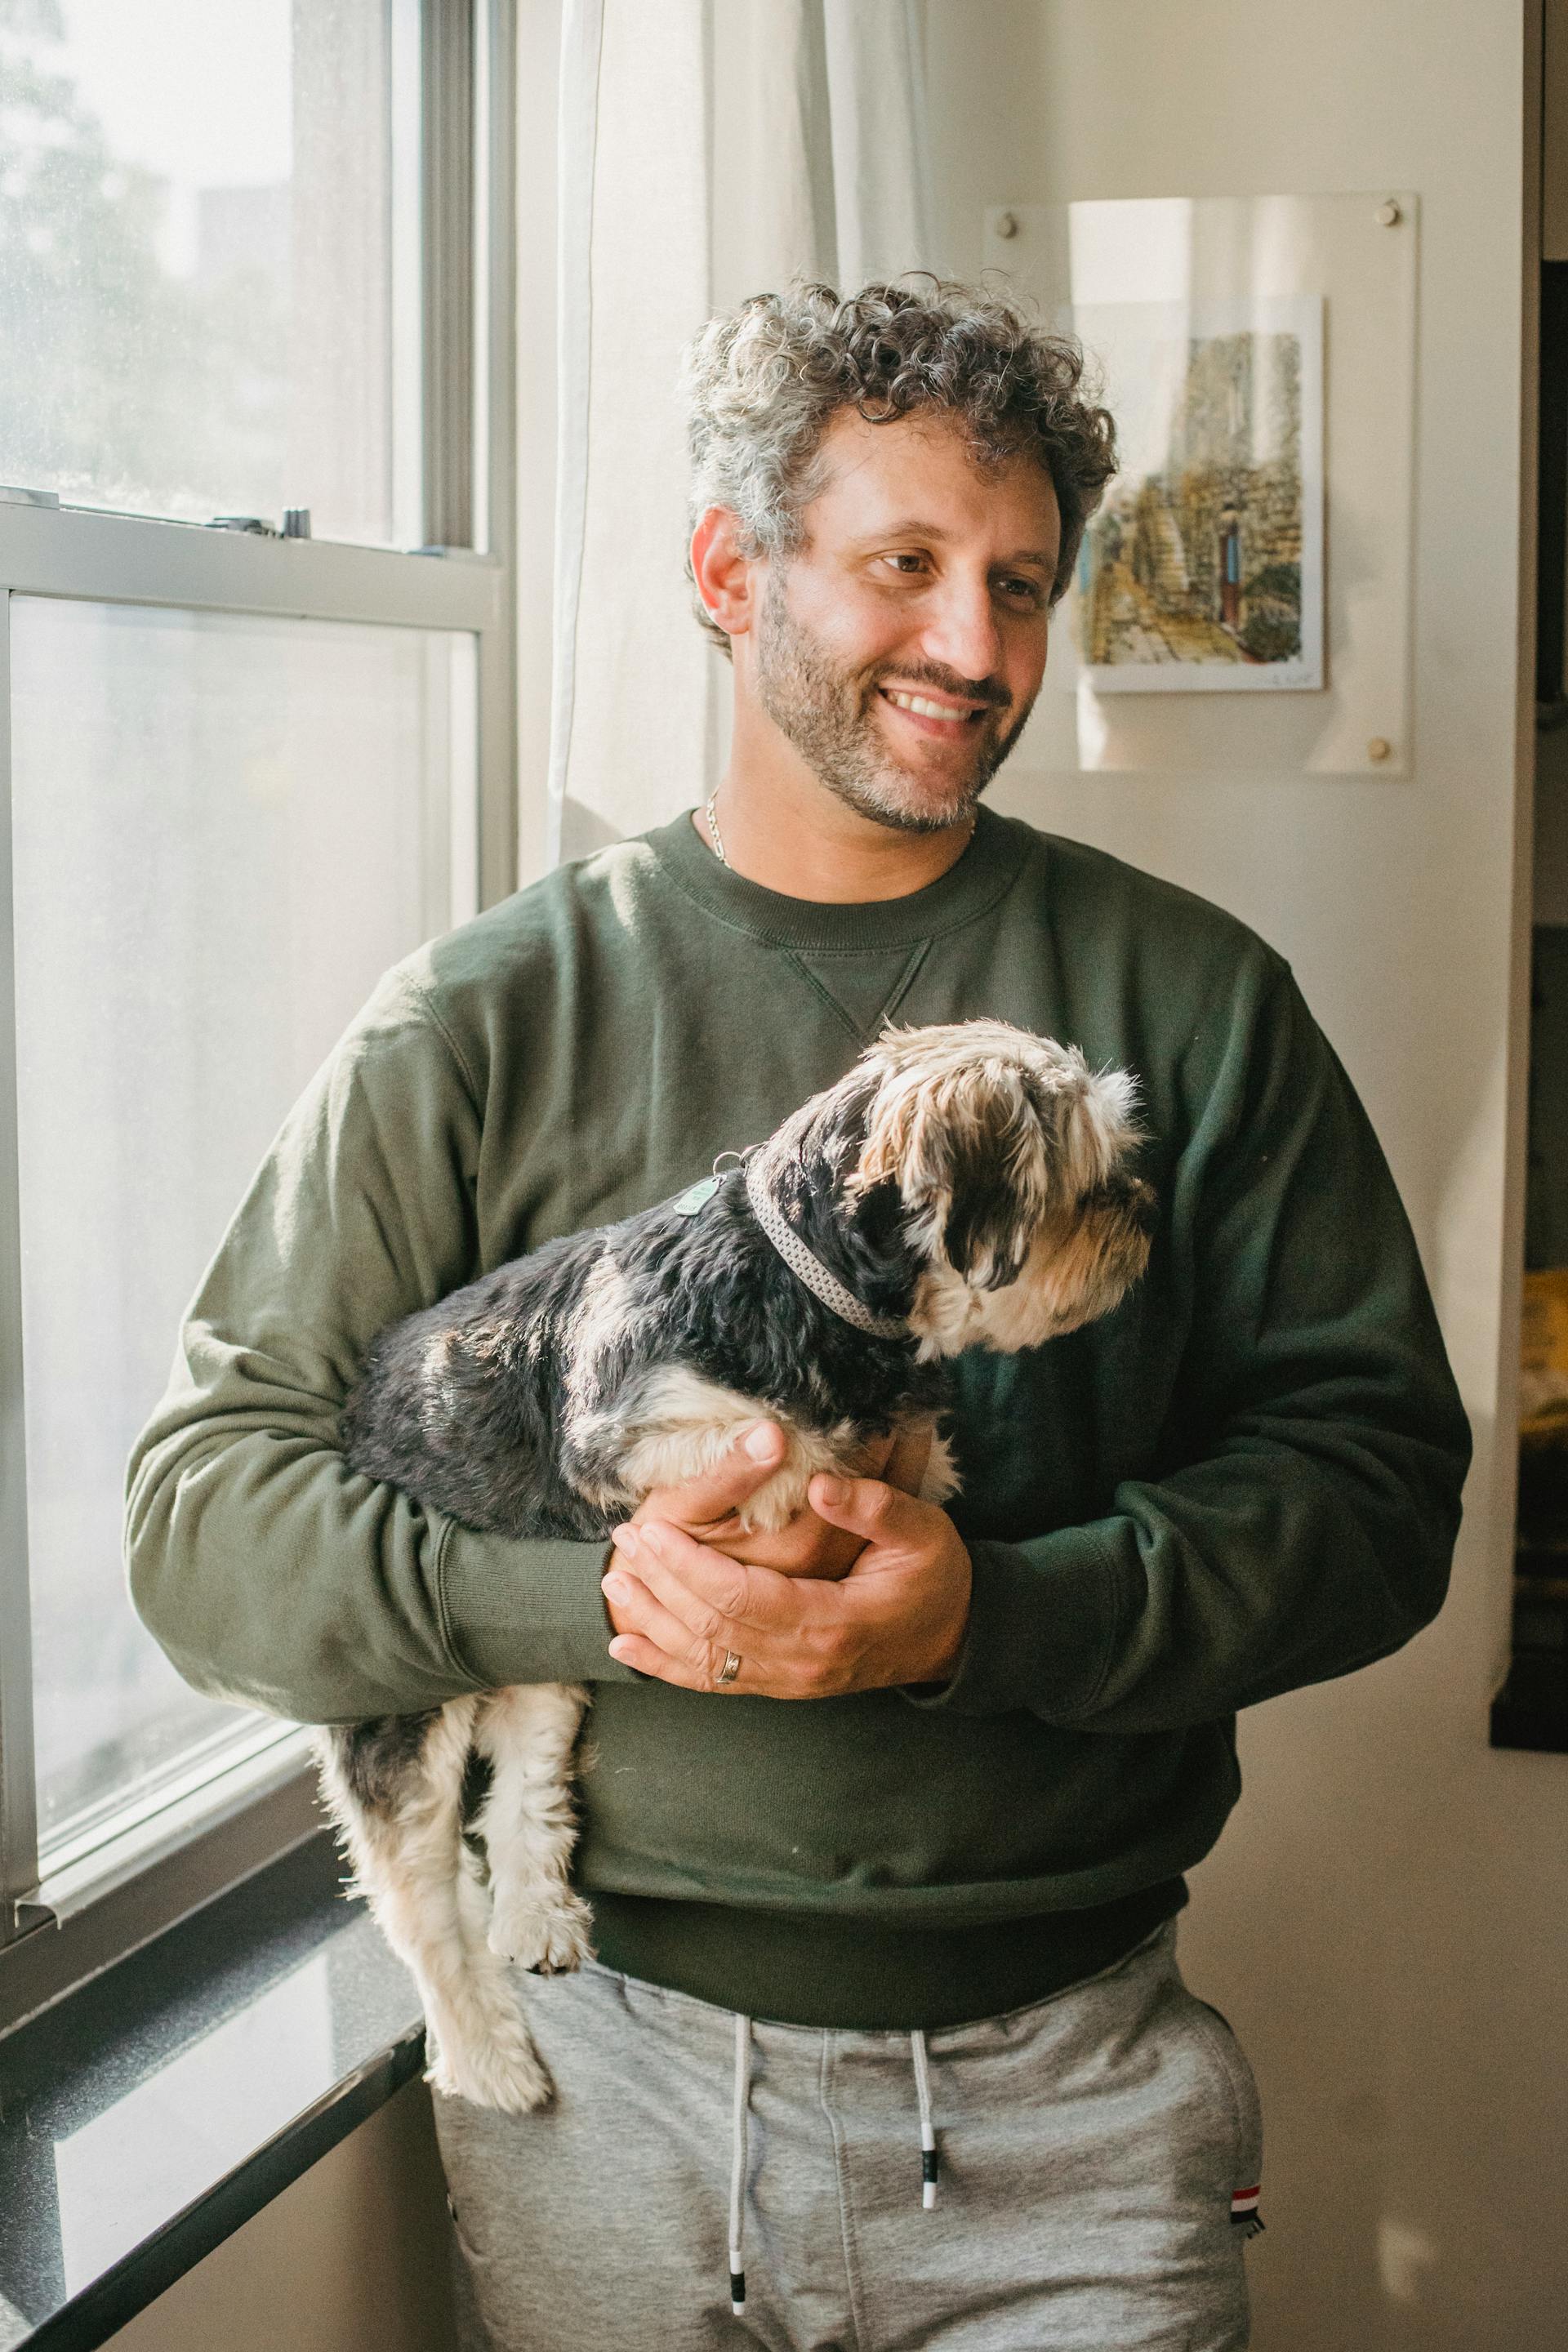 A man holding a dog while standing near a window | Source: Pexels